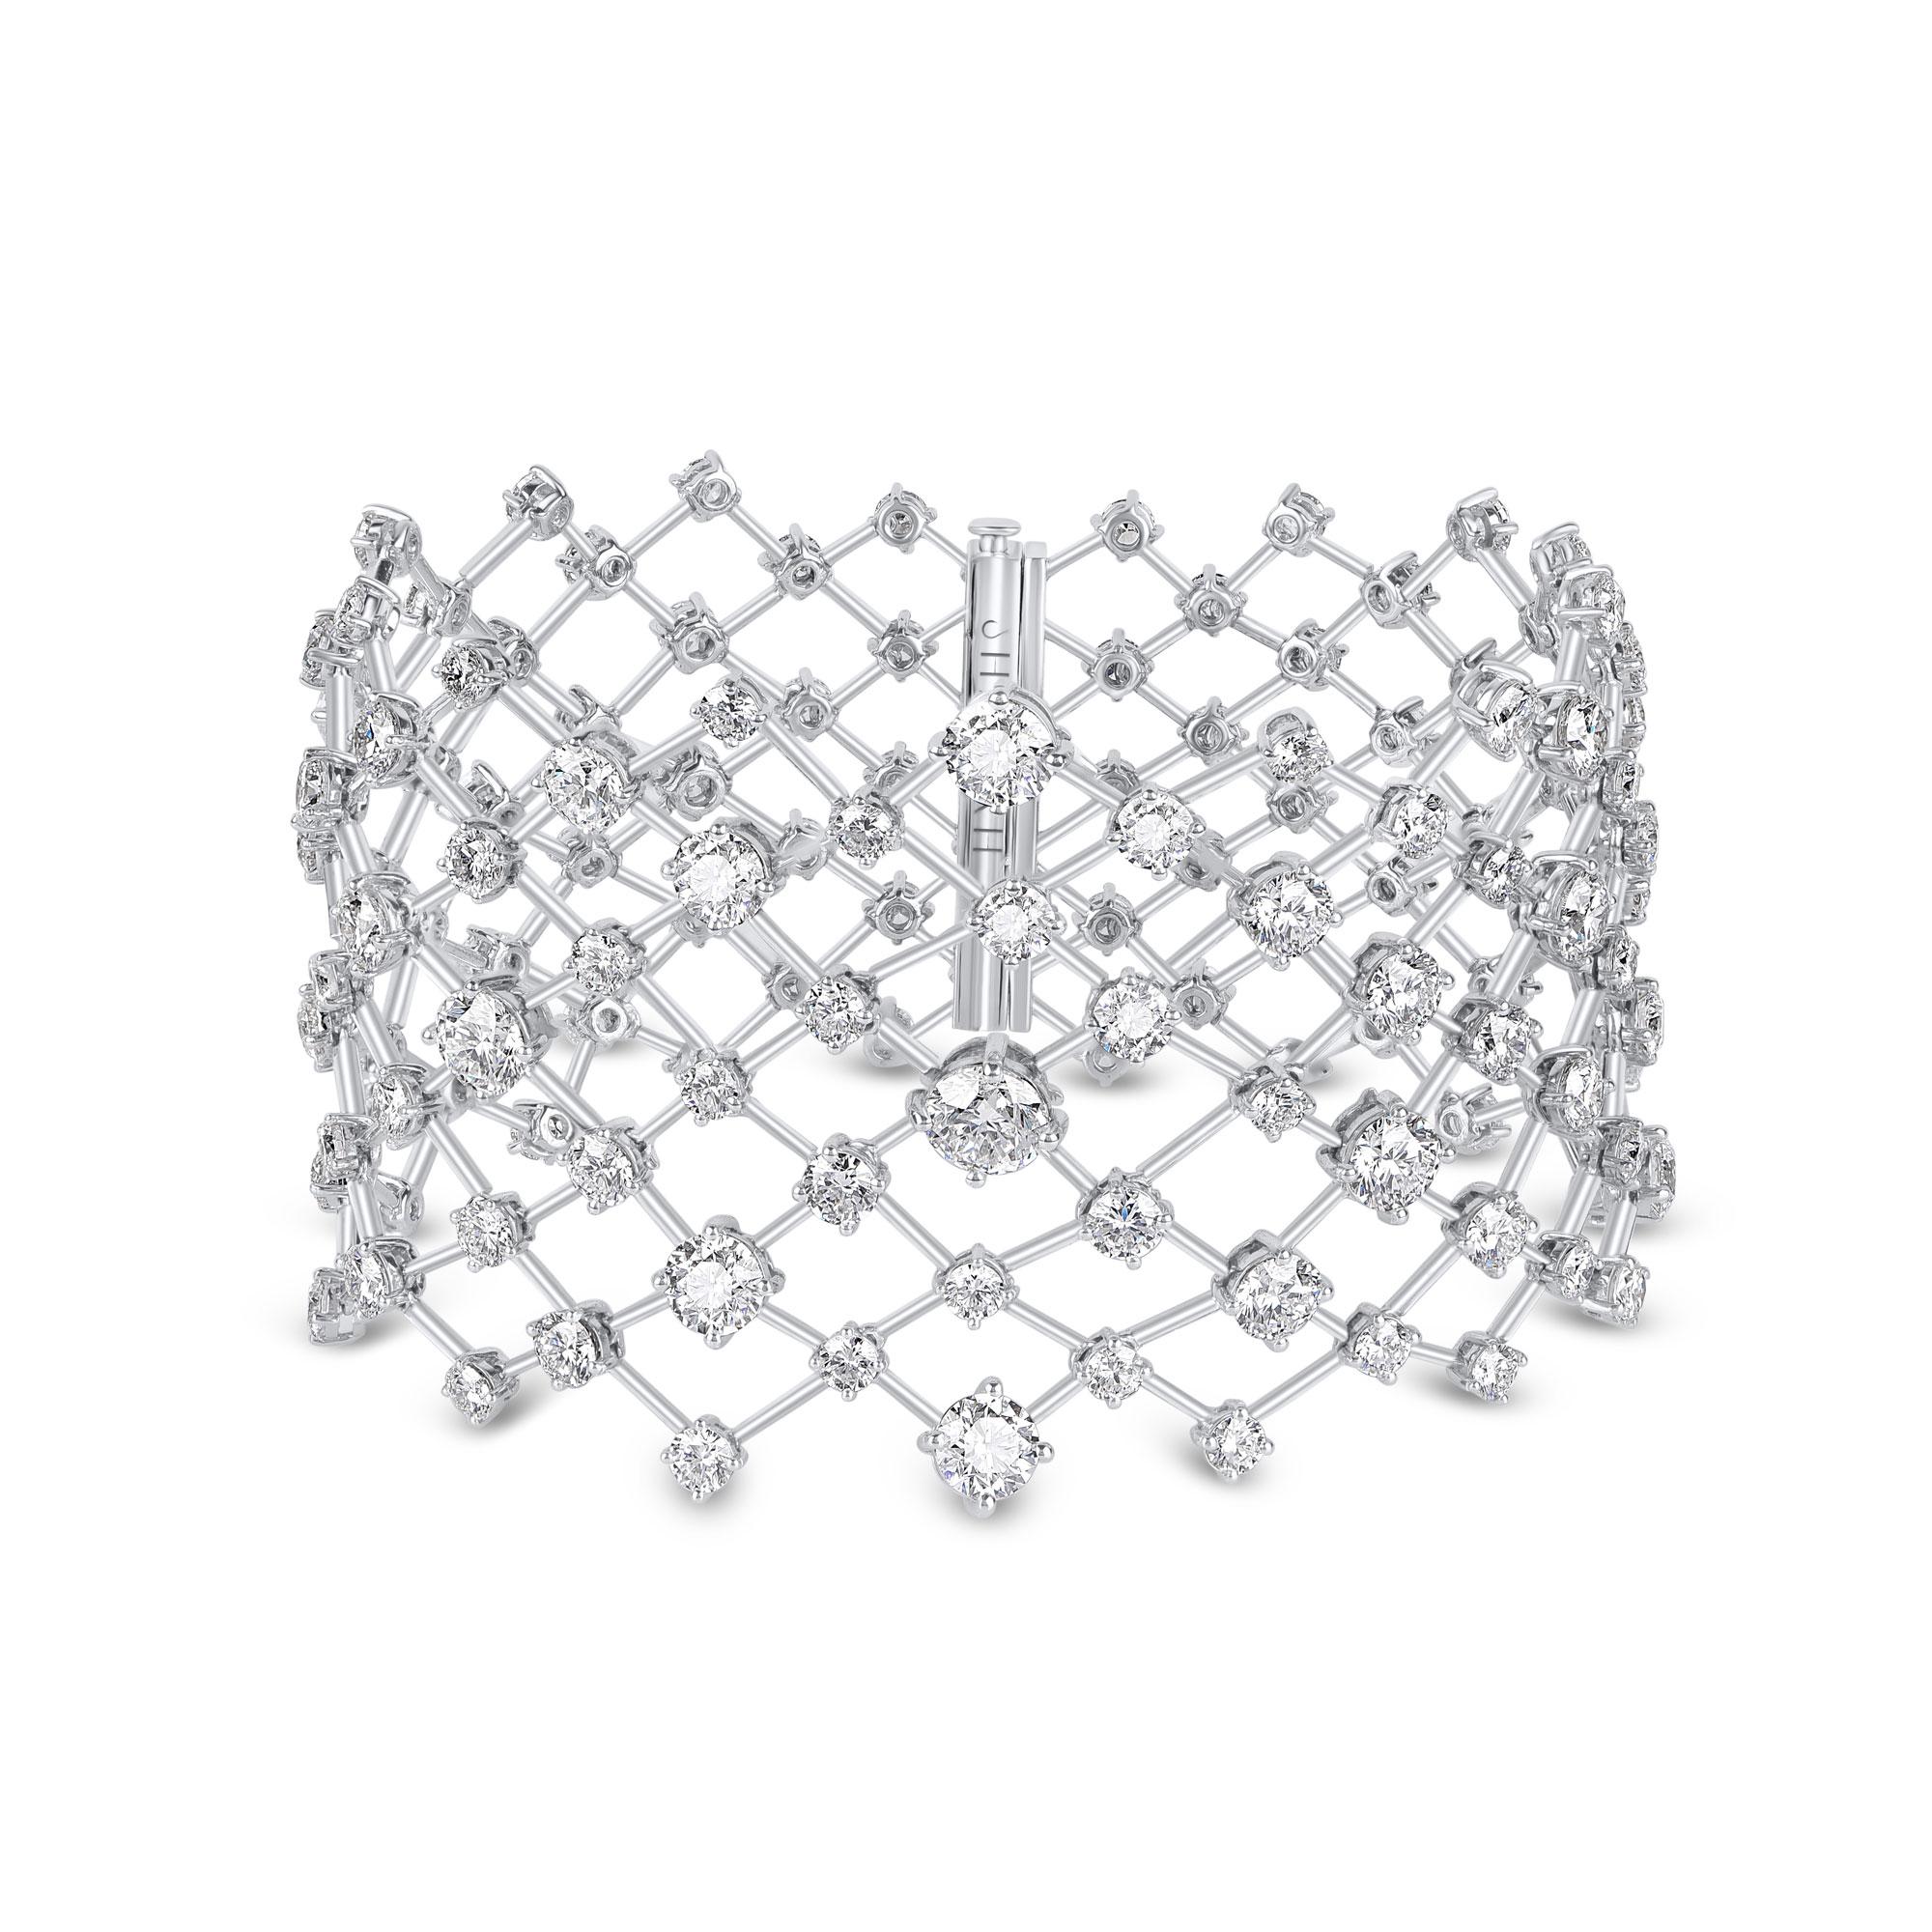 The bracelet is set with 199 brilliant cut round diamonds in claw setting, in a unique design, reminiscent of stars Illuminating the night skies. The total diamond weight of this bracelet is 22.15 carats. Using a proprietary linking mechanism, this